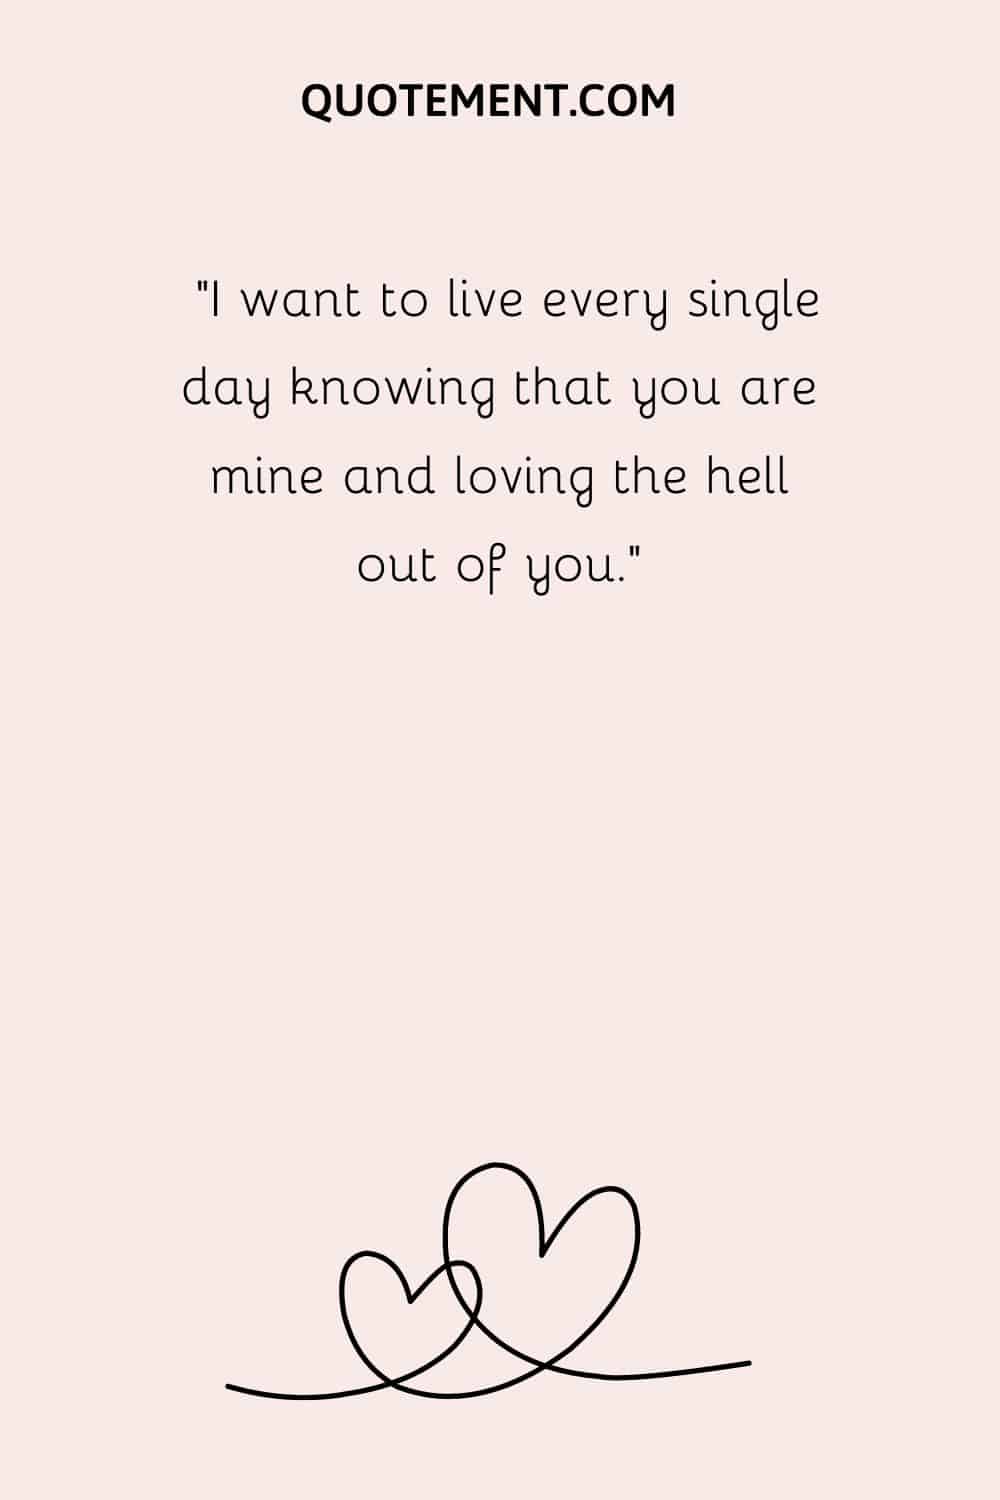 “I want to live every single day knowing that you are mine and loving the hell out of you.”